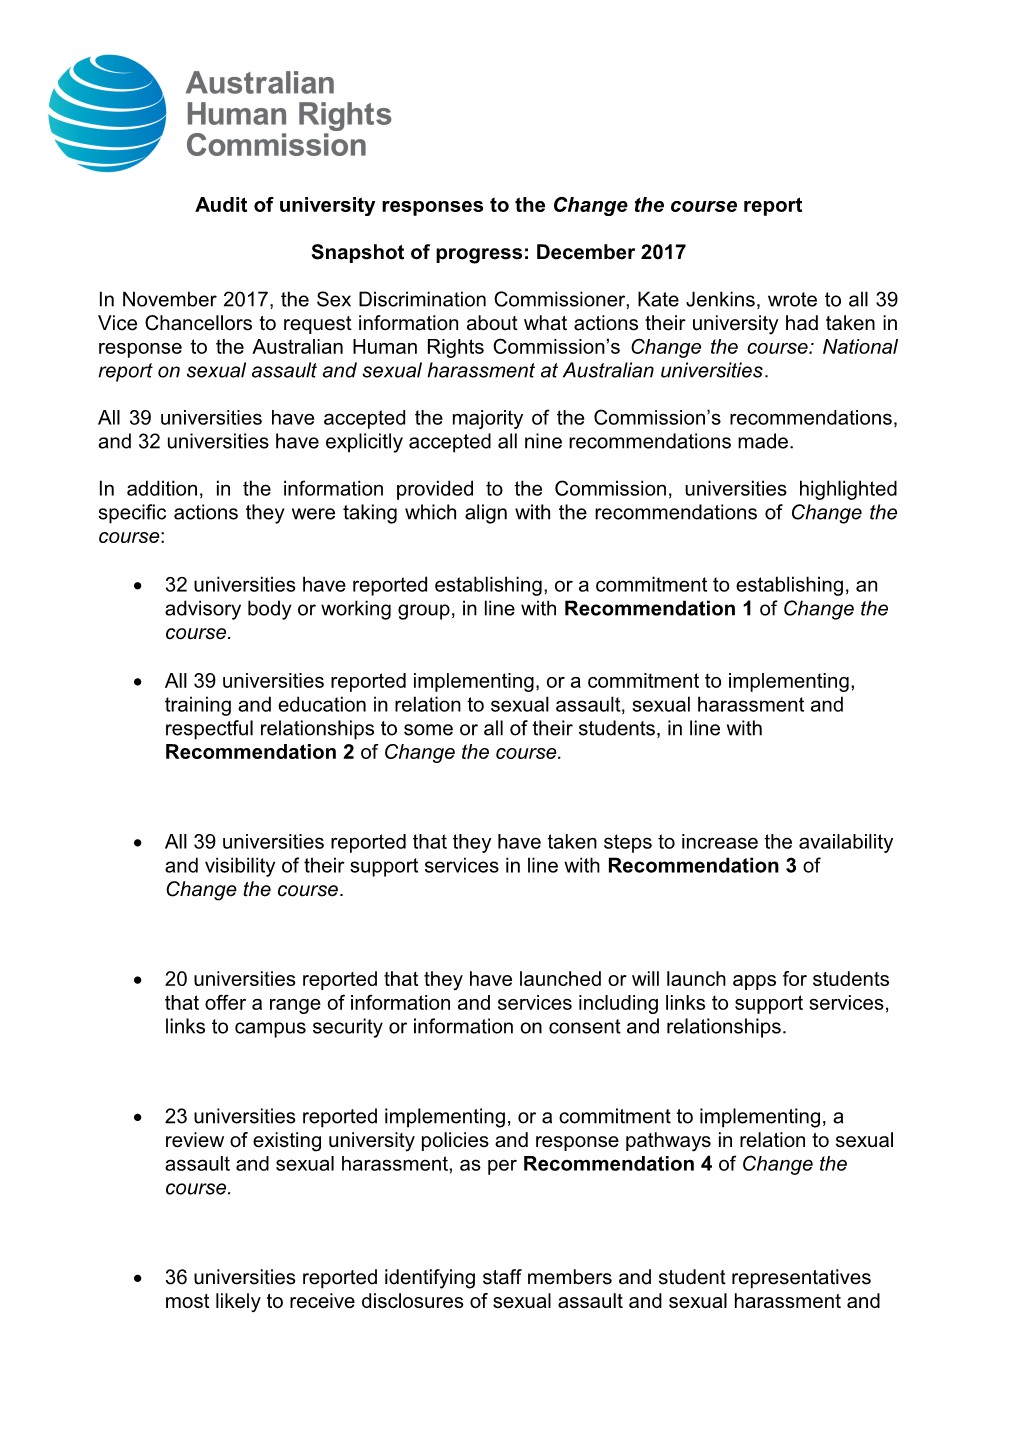 Audit of University Responses to the Change the Course Report